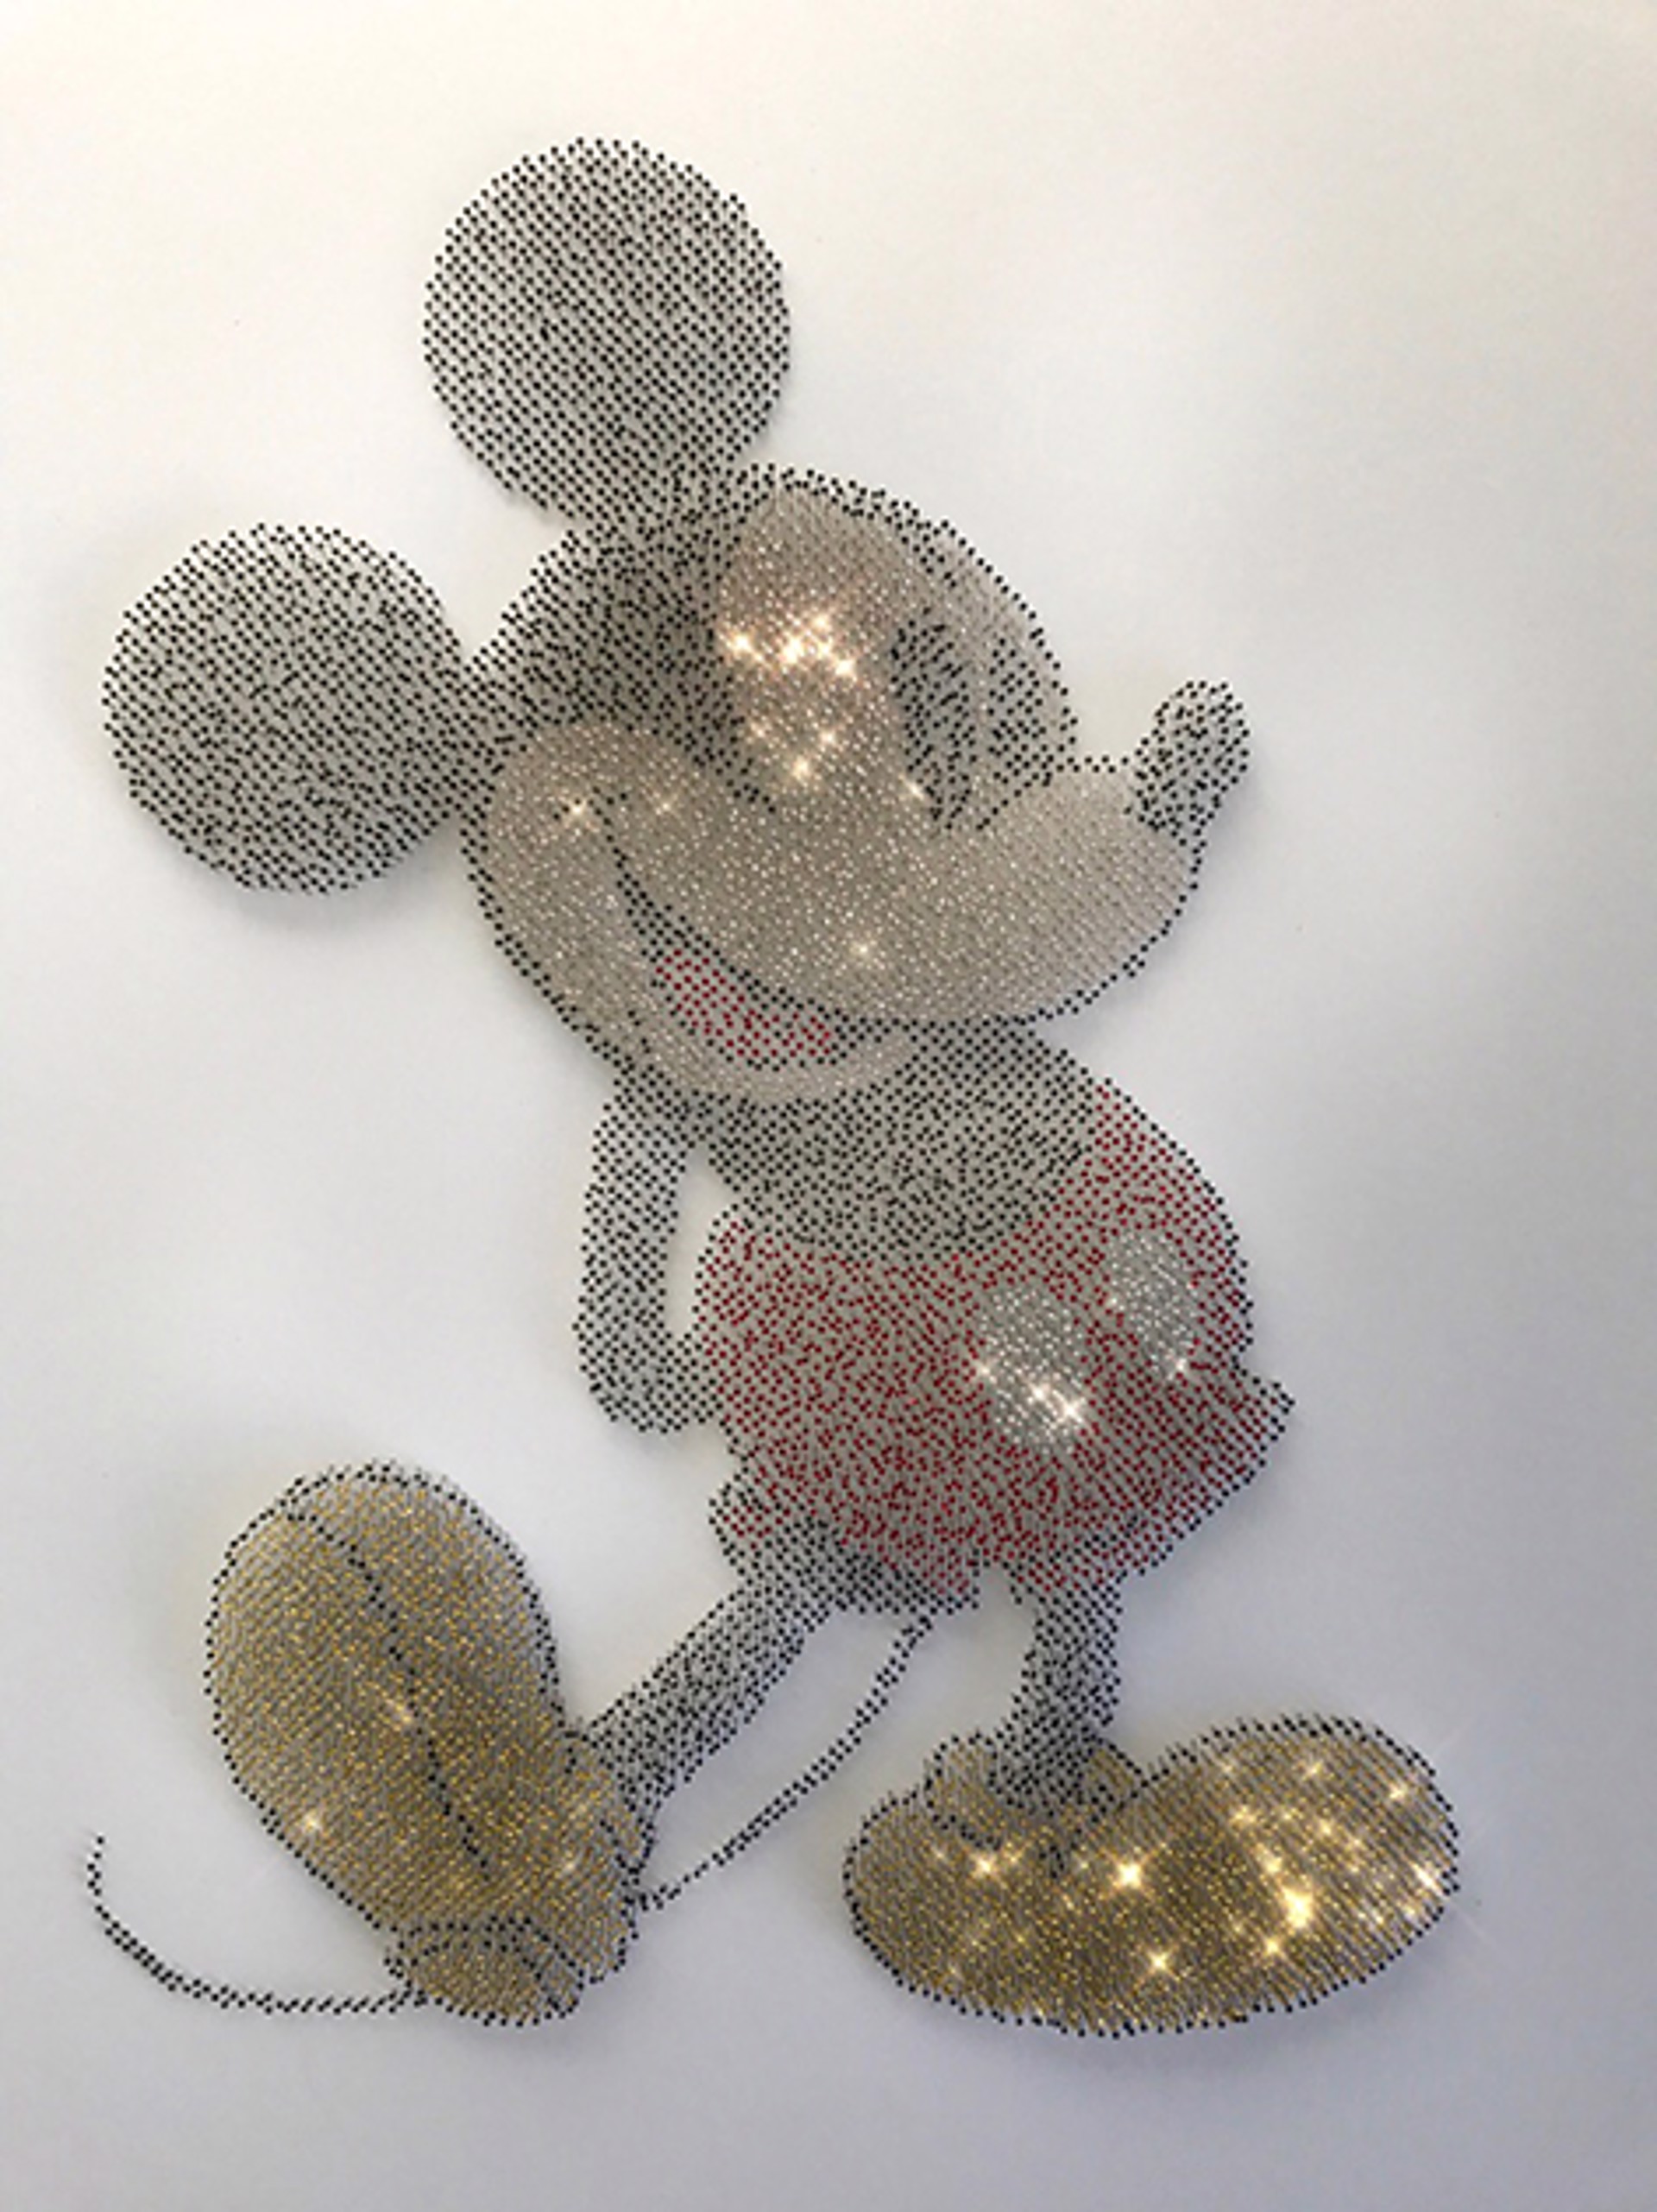 Mickey Mouse by Stephen Graham